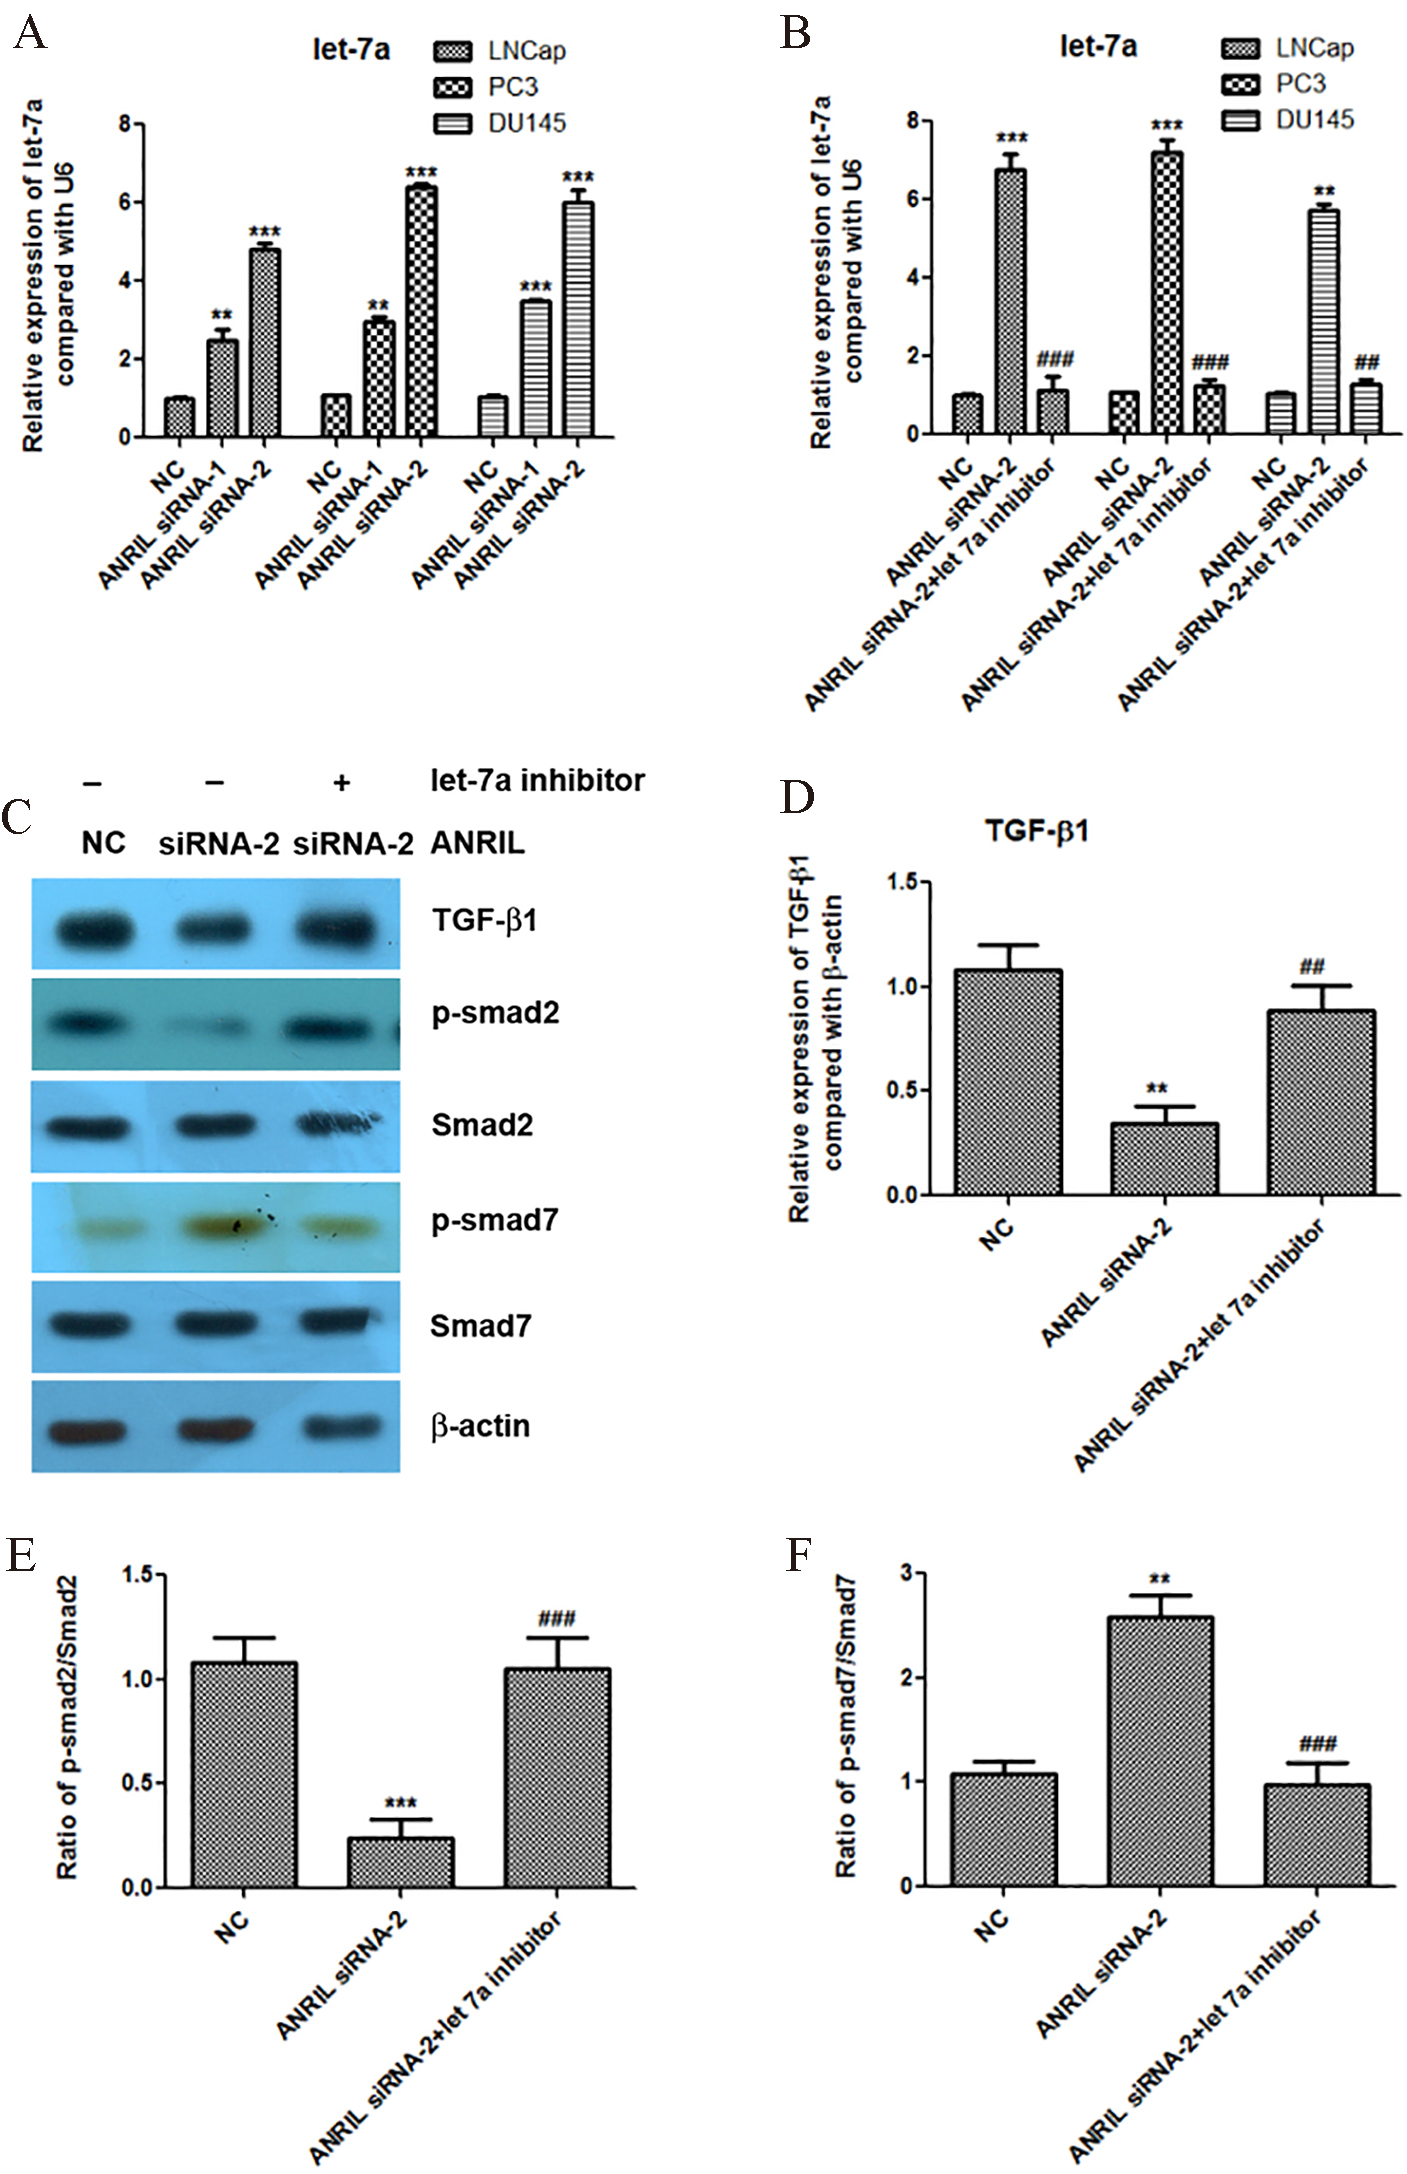 Knockdown of lncRNA ANRIL increases the expression of let-7a, and let-7a inhibitor reactivates the TGF-β1/Smad signaling pathway at the condition of ANRIL silencing. A. Knockdown of lncRNA ANRIL increases the expression of let-7a detected by Real-time PCR. B. Knockdown of let-7a inhibitor in LNCap, PC3 and DU145 cells was detected by Real-time PCR. C to F. Effect of let-7a inhibitor at condition of ANRIL silencing on the expression levels of TGF-β1, p-smad2, smad2, p-smad7 and smad7 detected by western blotting assay, and statistical analysis was done using Student’s test. *, P< 0.05; **, P< 0.01; *⁣**, P< 0.001.